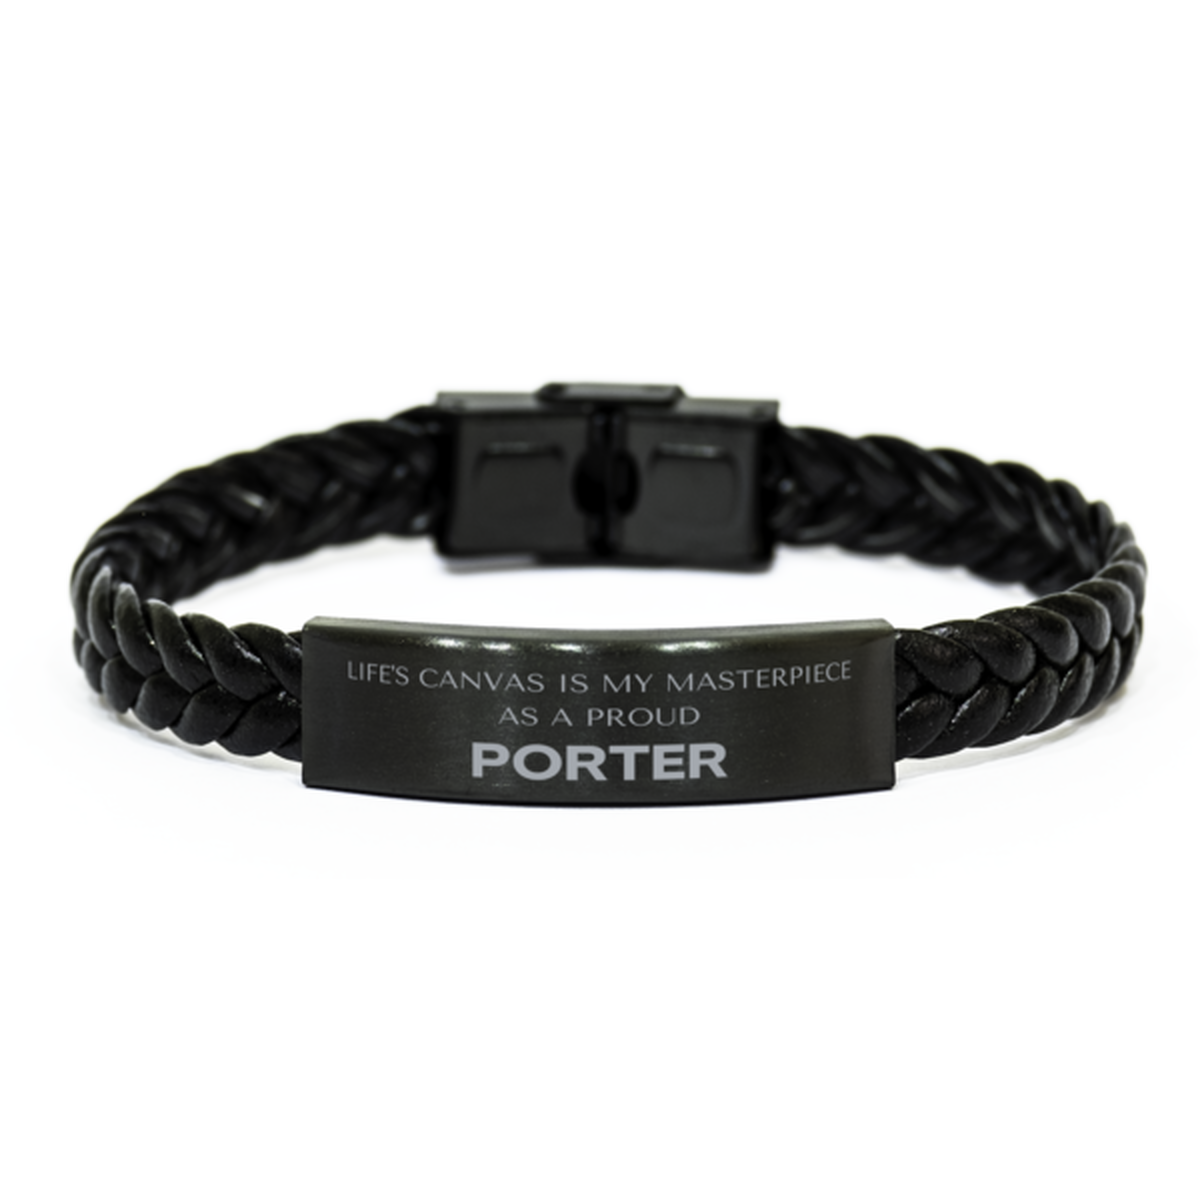 Proud Porter Gifts, Life's canvas is my masterpiece, Epic Birthday Christmas Unique Braided Leather Bracelet For Porter, Coworkers, Men, Women, Friends